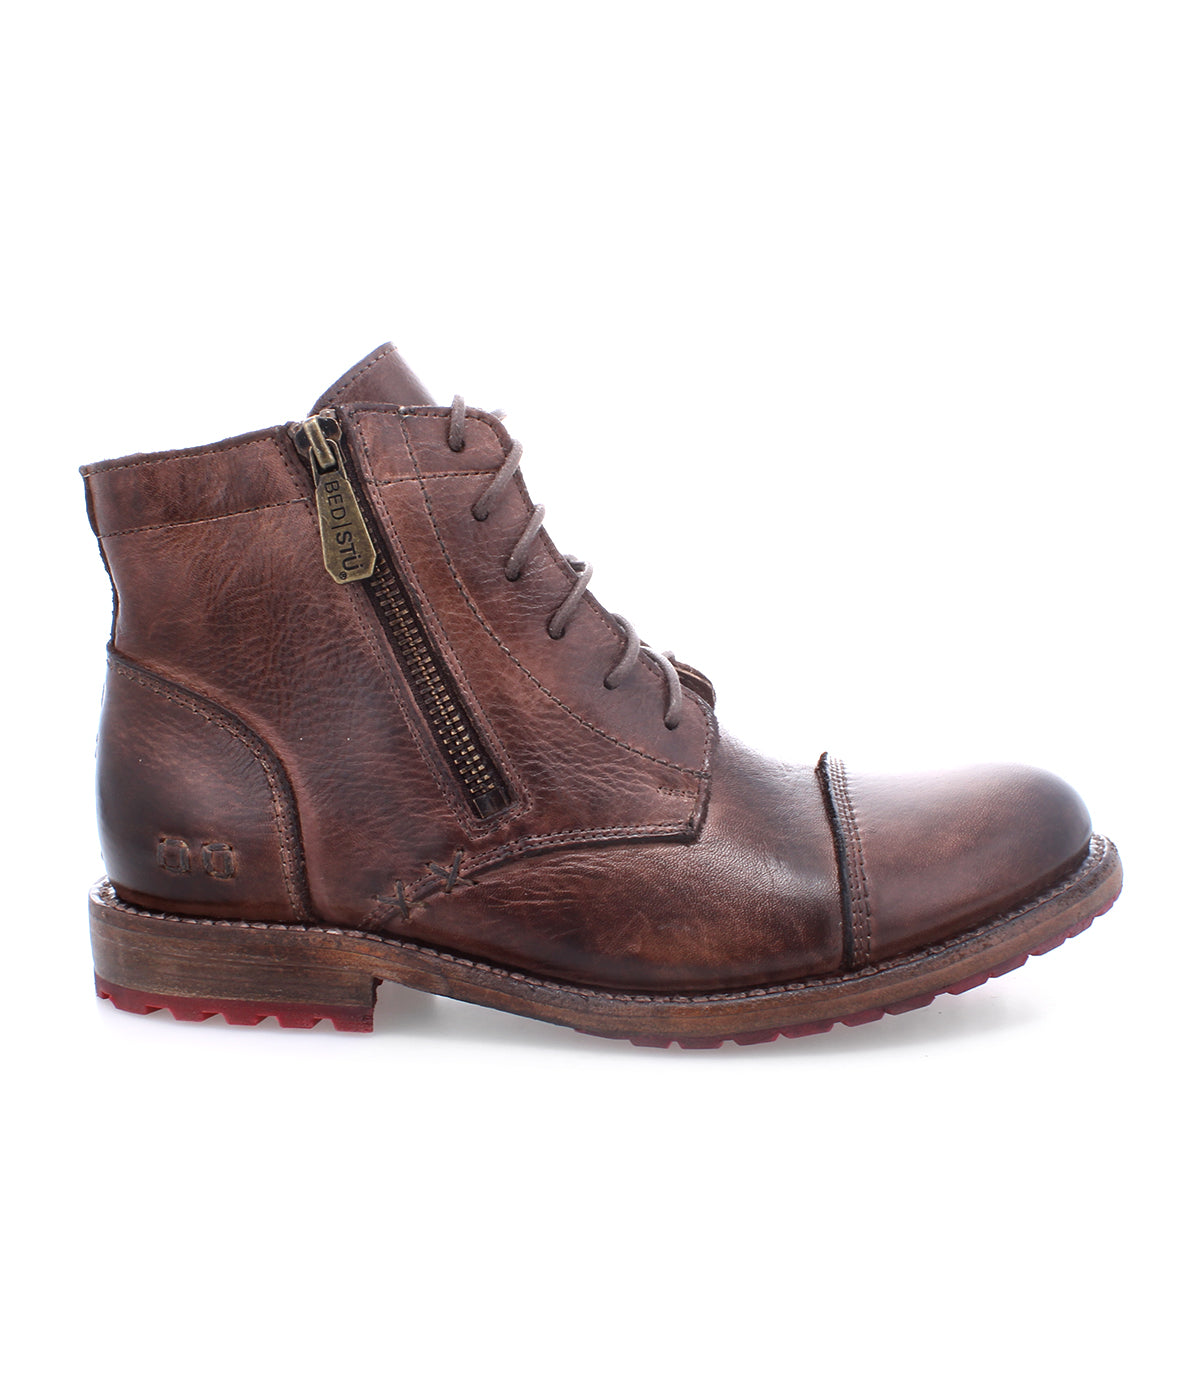 A Bonnie II teak leather boot with a zipper on the side from Bed Stu.